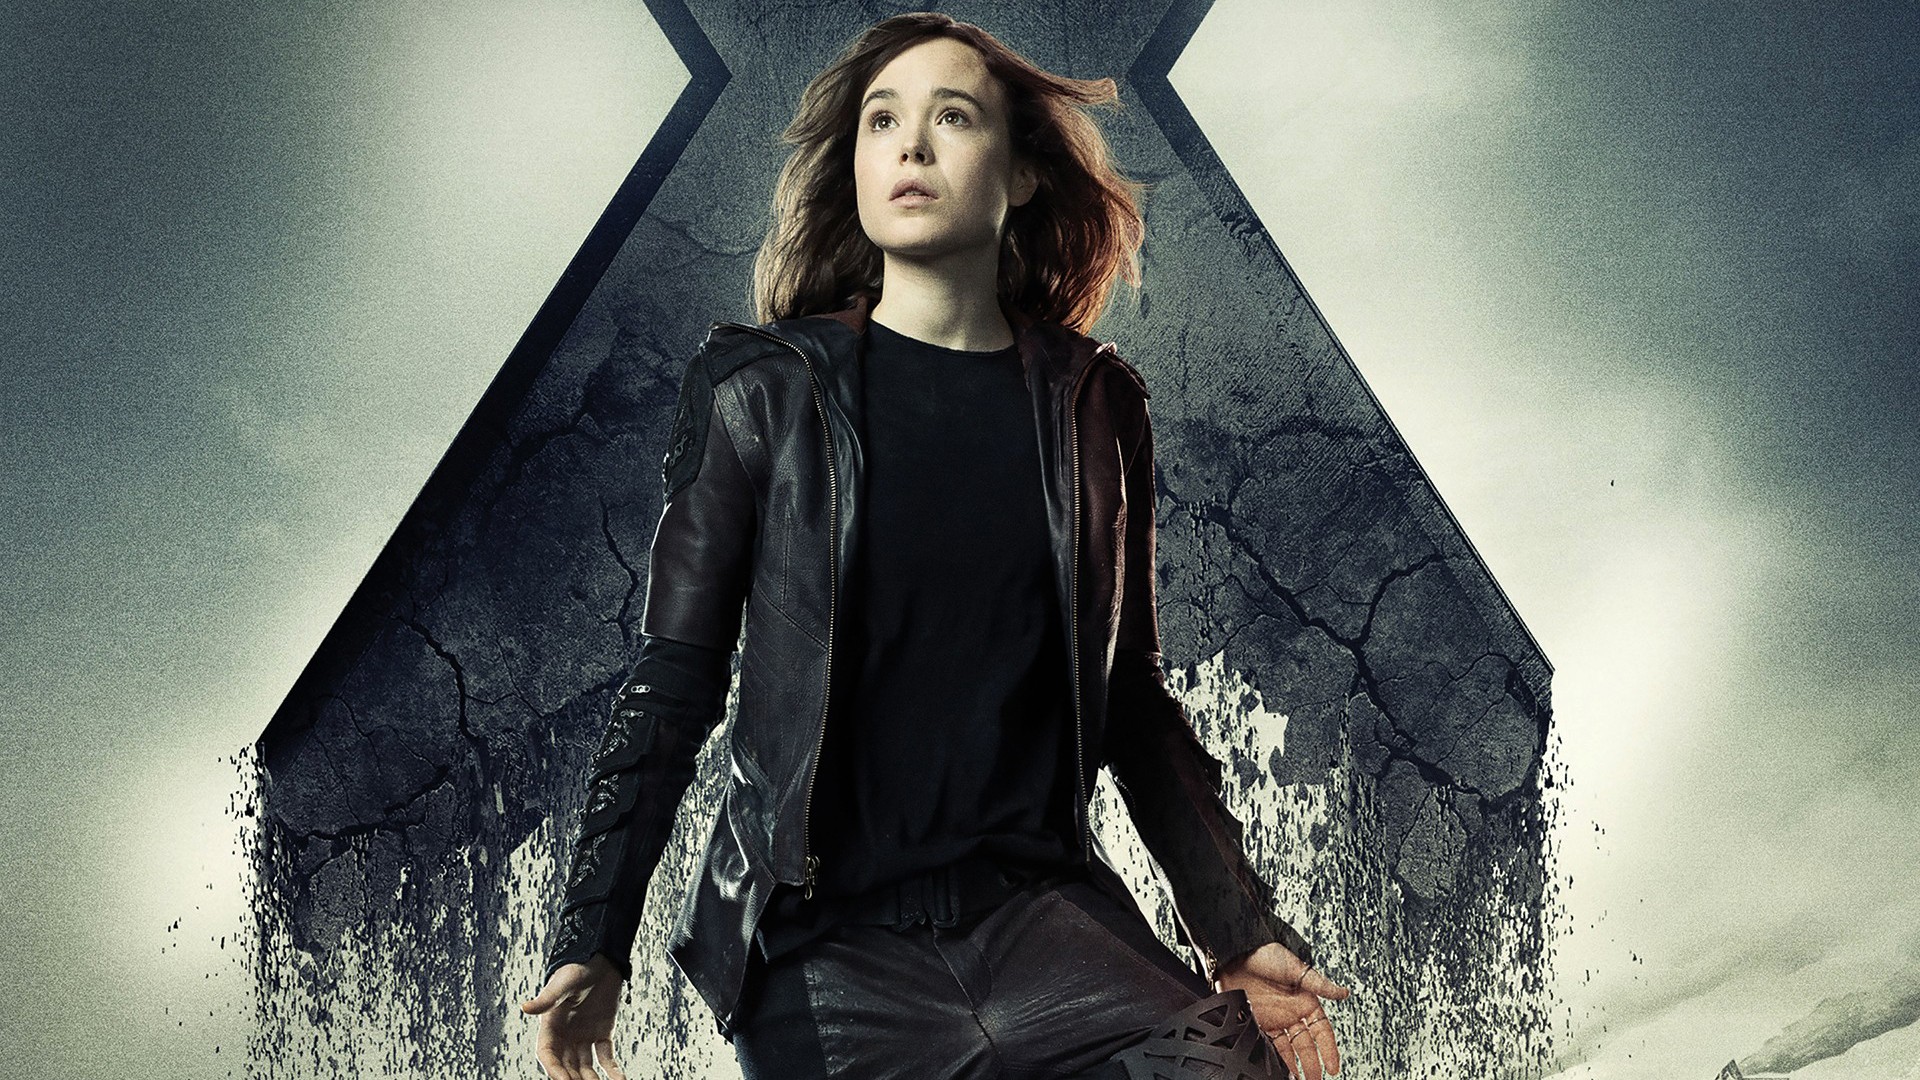 People 1920x1080 women face leather jacket X-Men Elliot Page Kitty Pryde actress movies